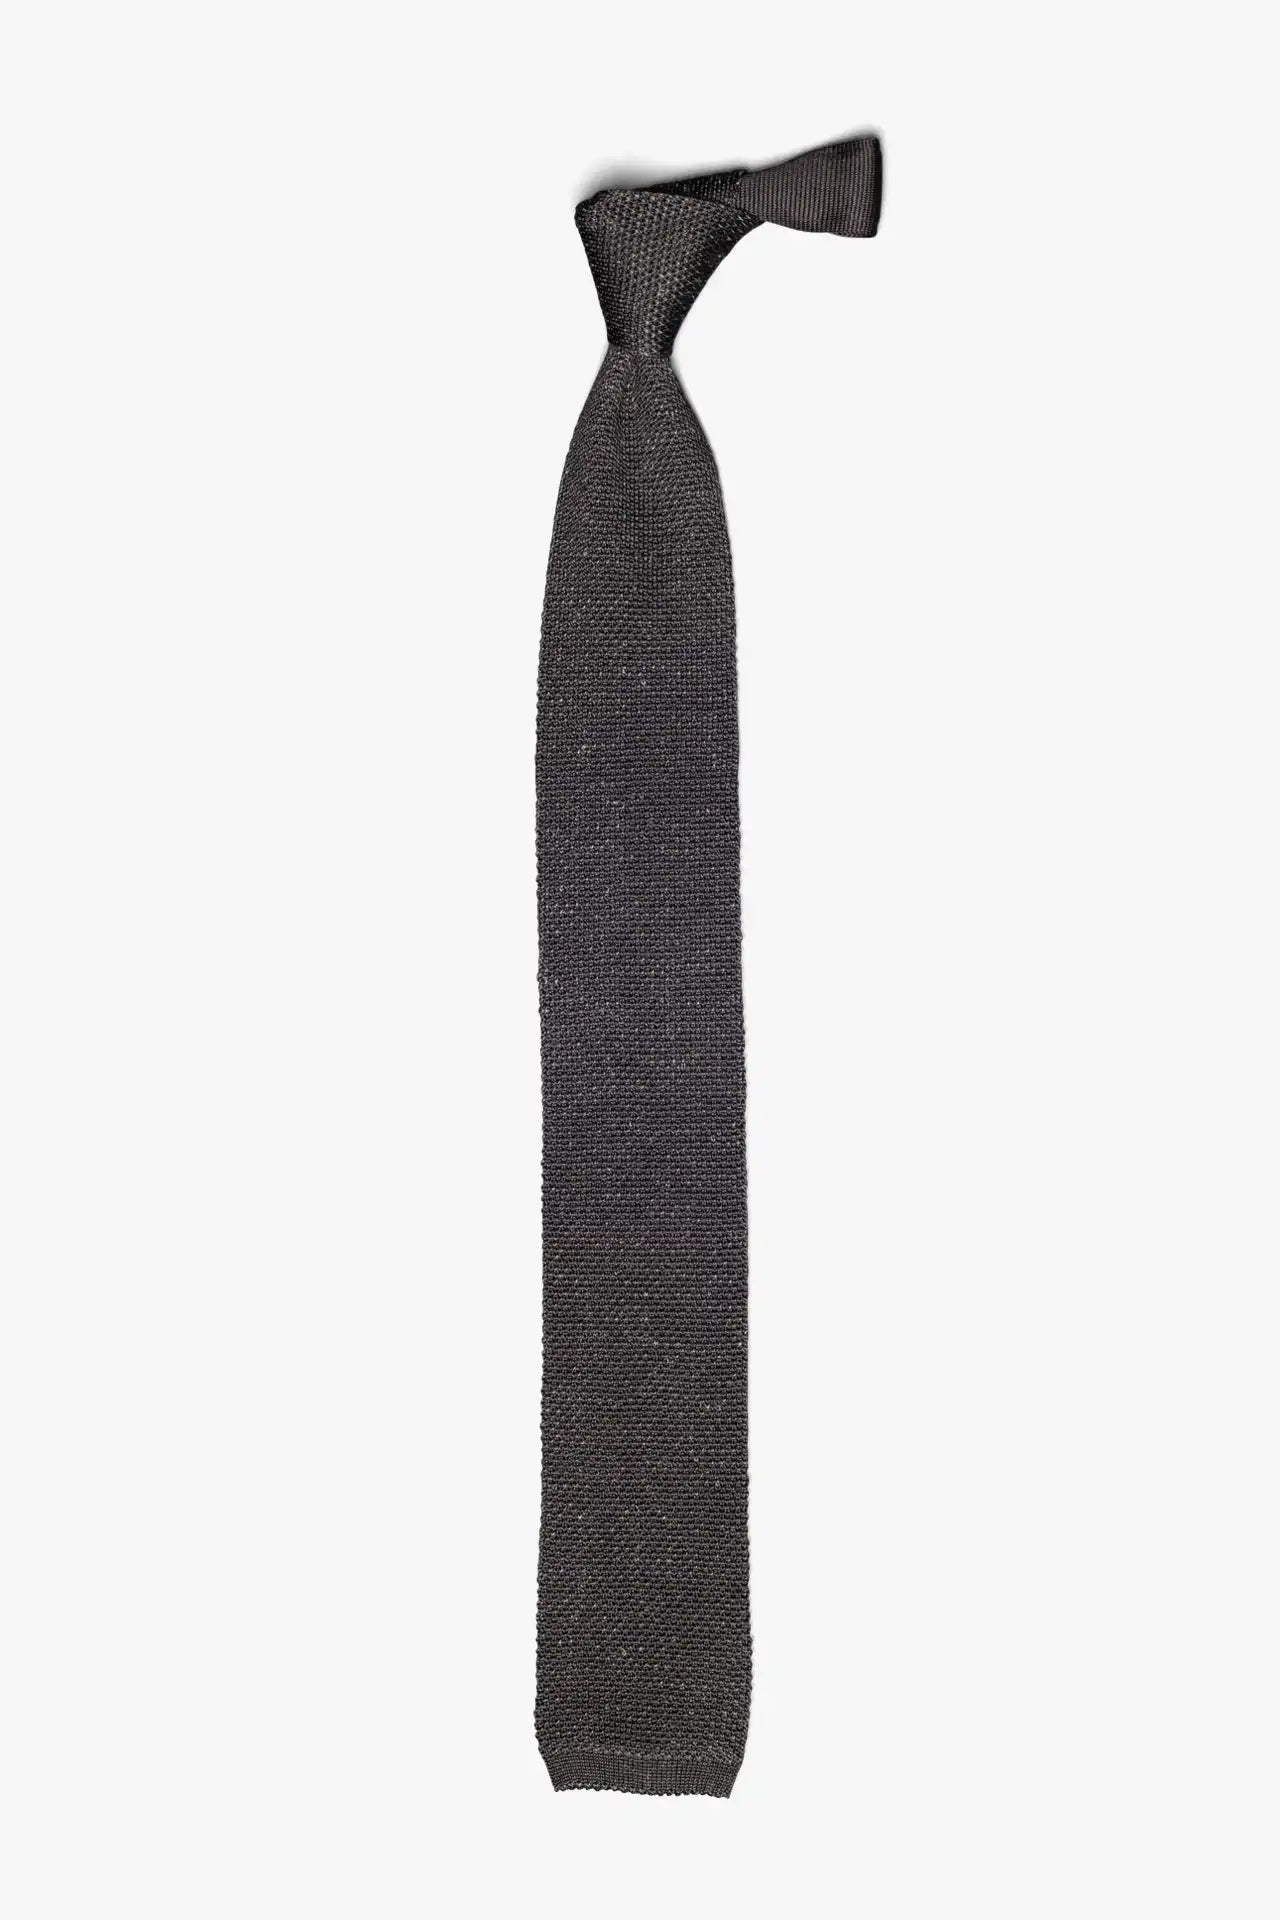 day - a Gray once Melange Silk Tie Linen -